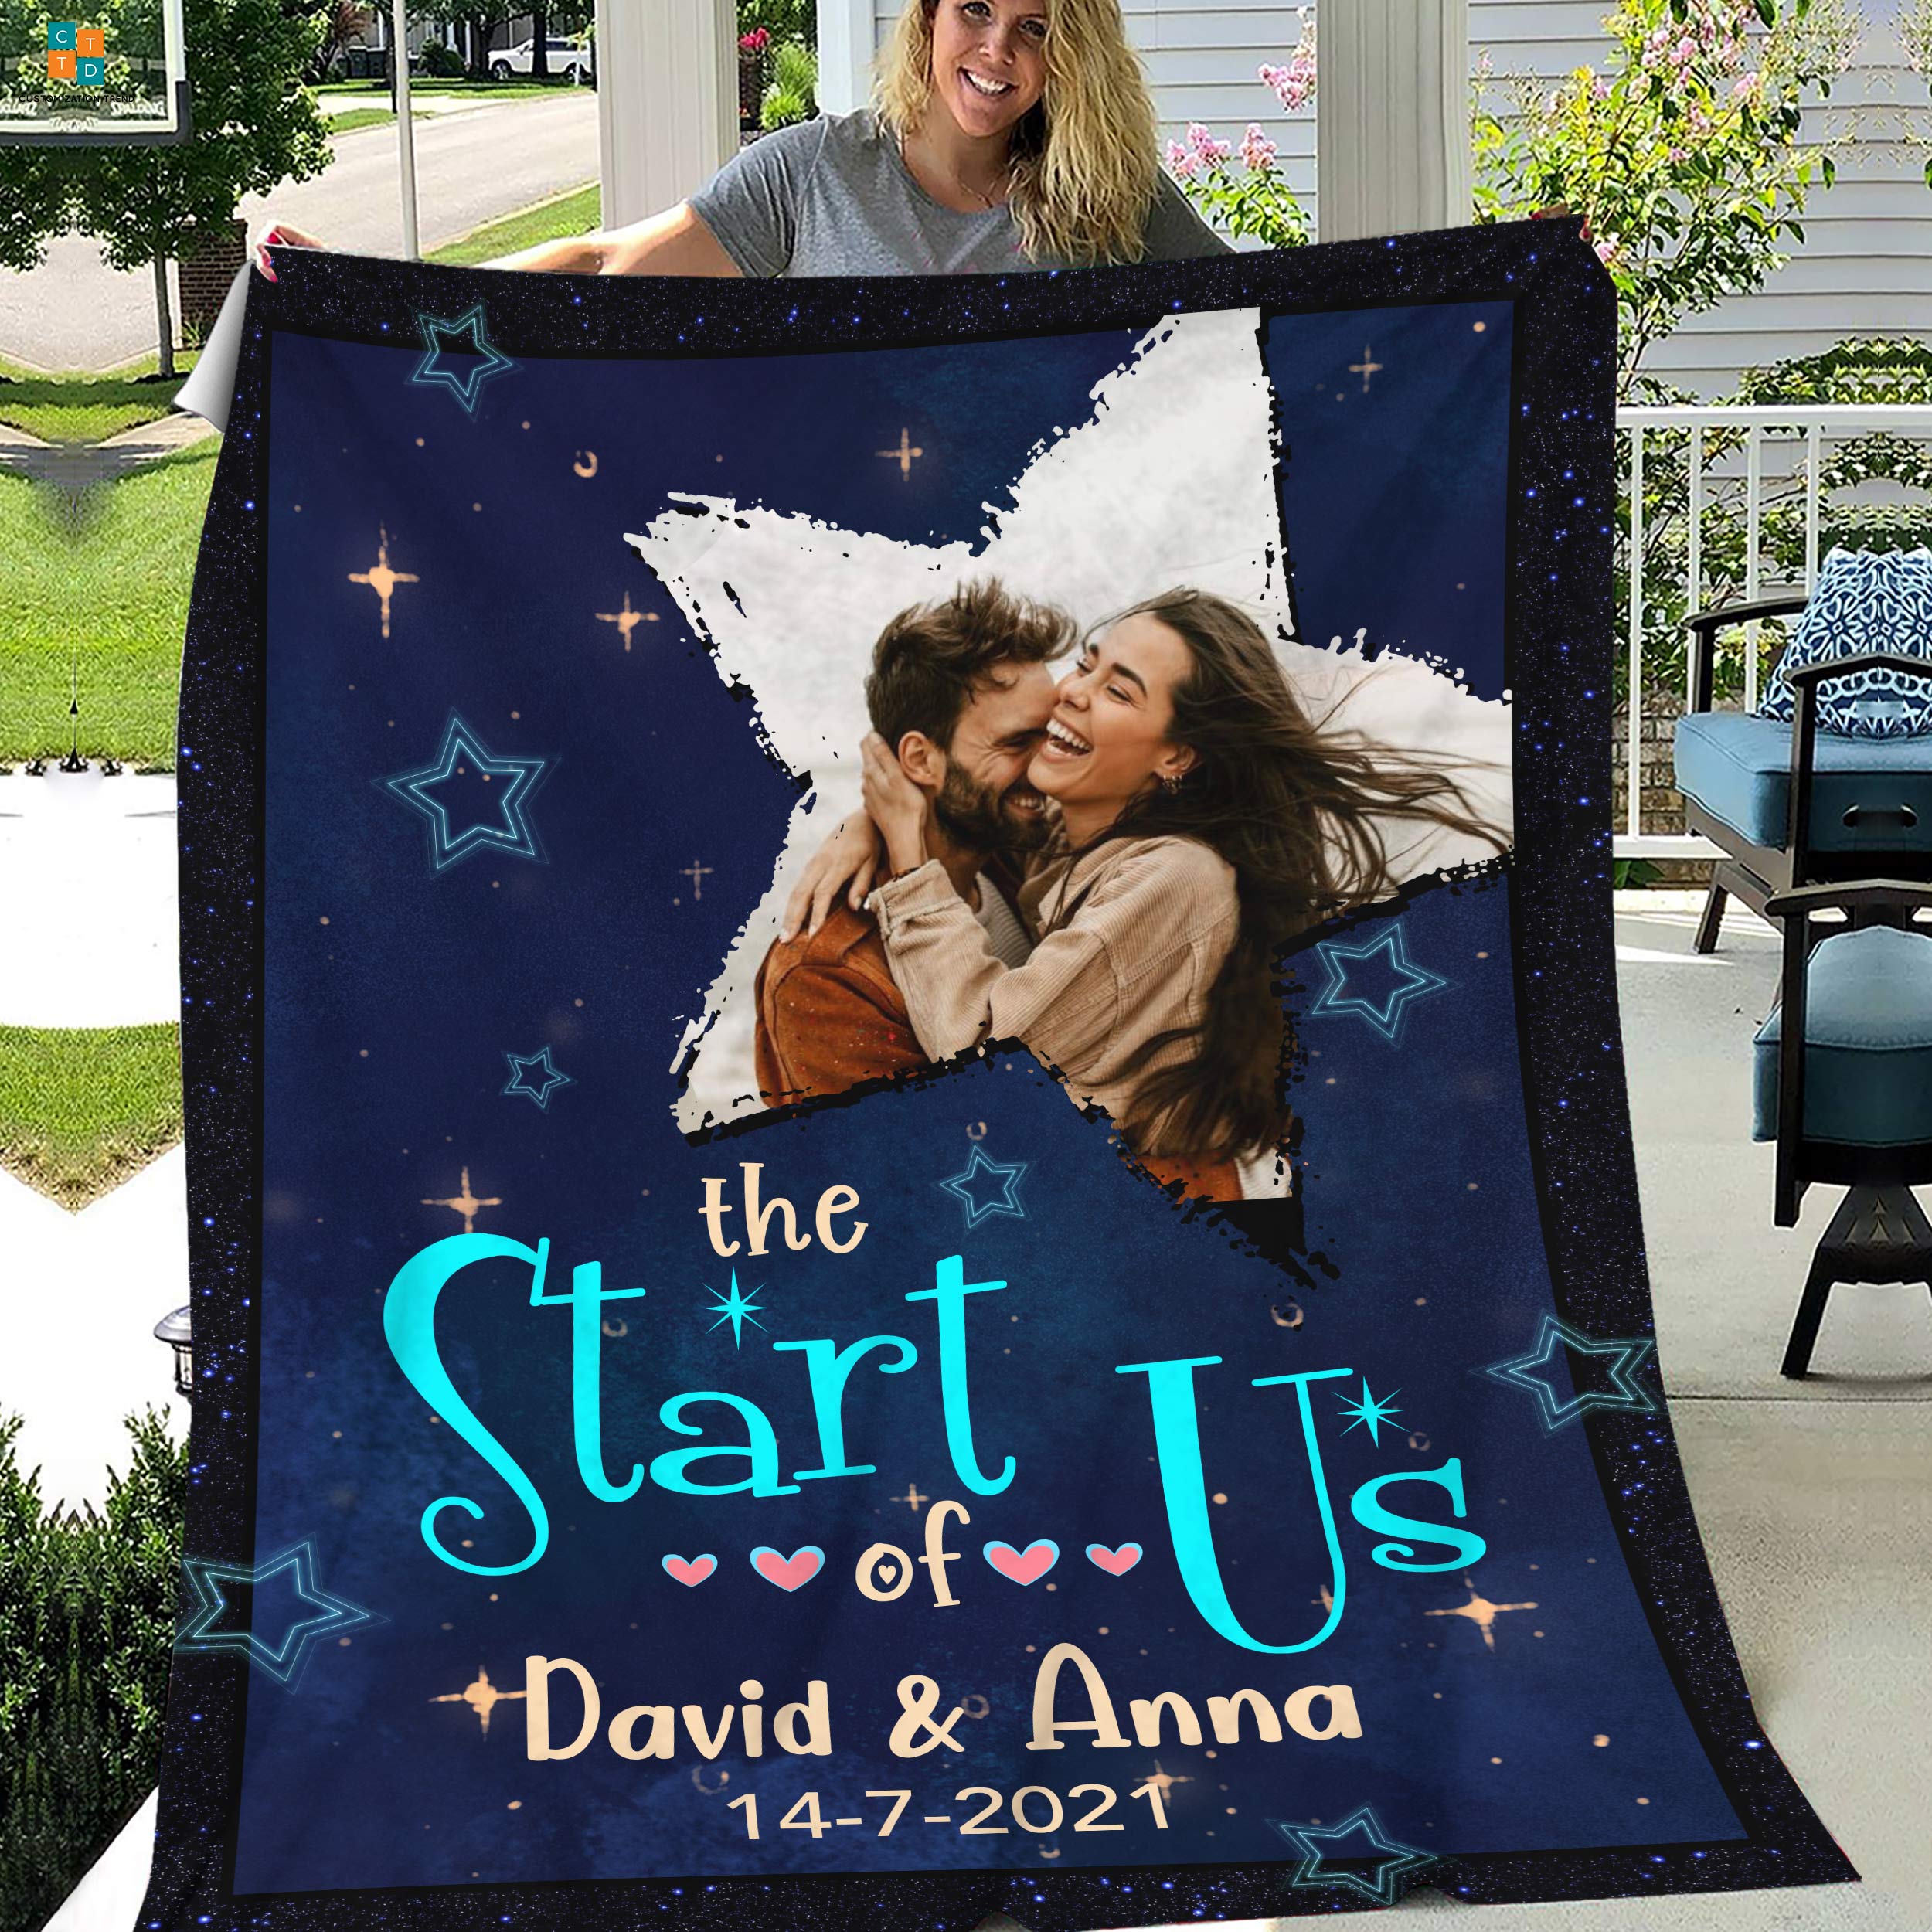 Personalized There’s A Point In Every True Friendship  Blanket , Custome Friend , Sisters, Friends Blanket